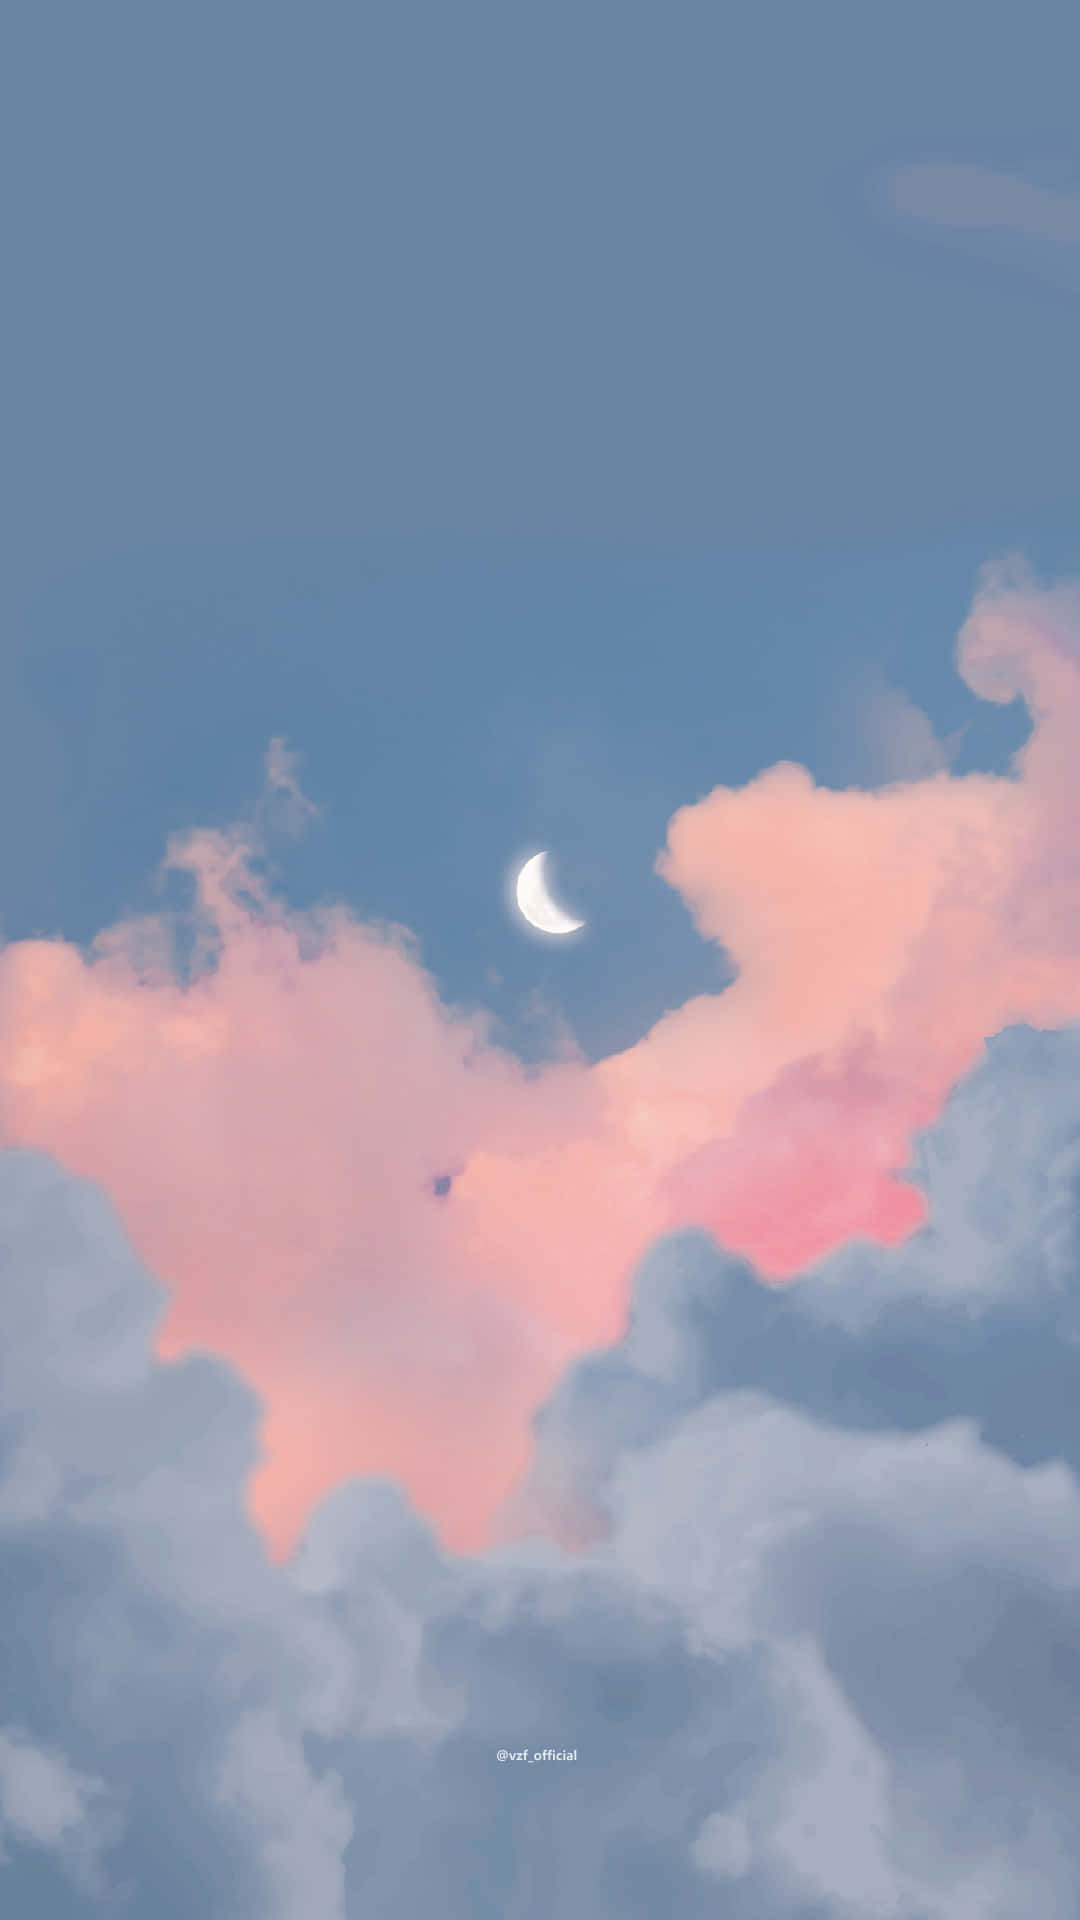 A crescent moon in a blue sky with pink clouds - Cloud